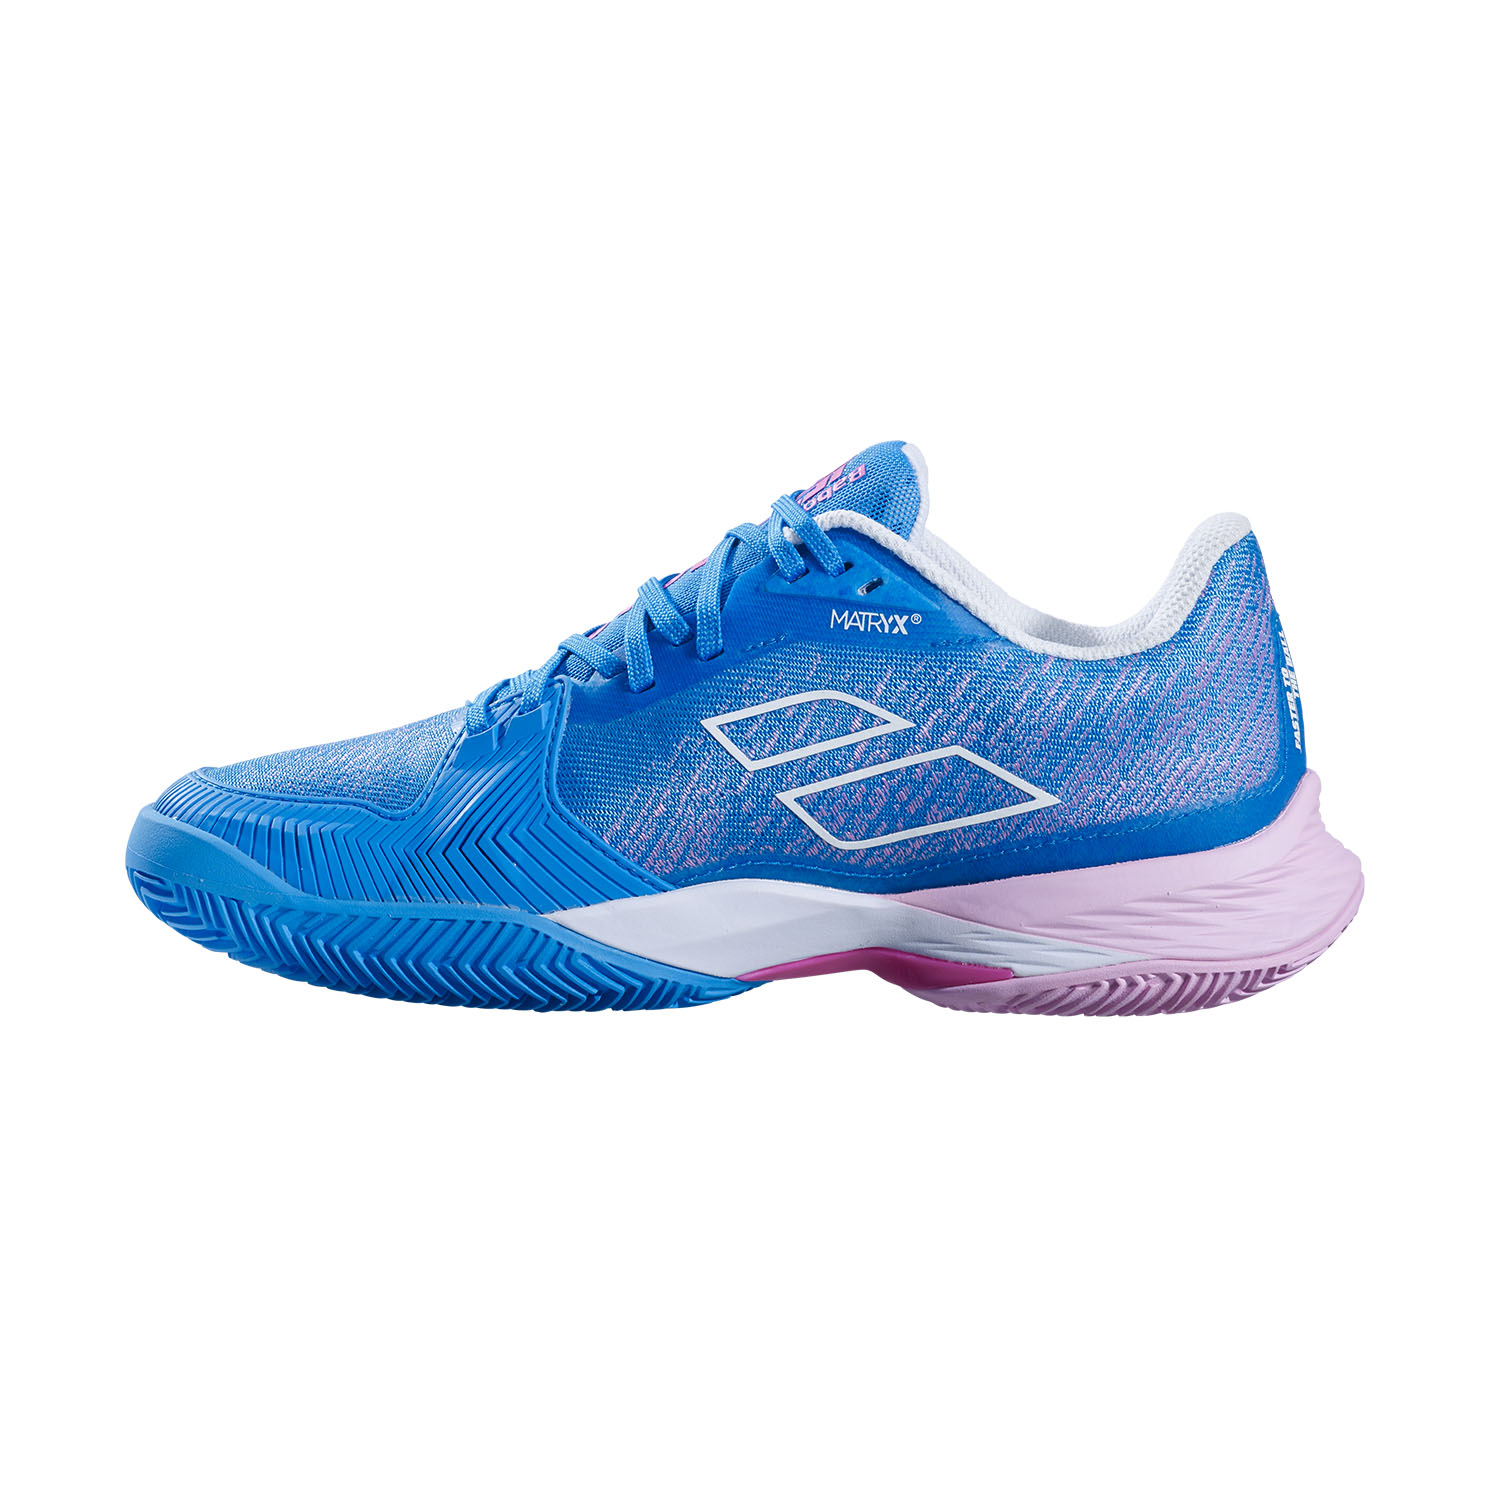 Babolat Jet Mach 3 Clay - French Blue